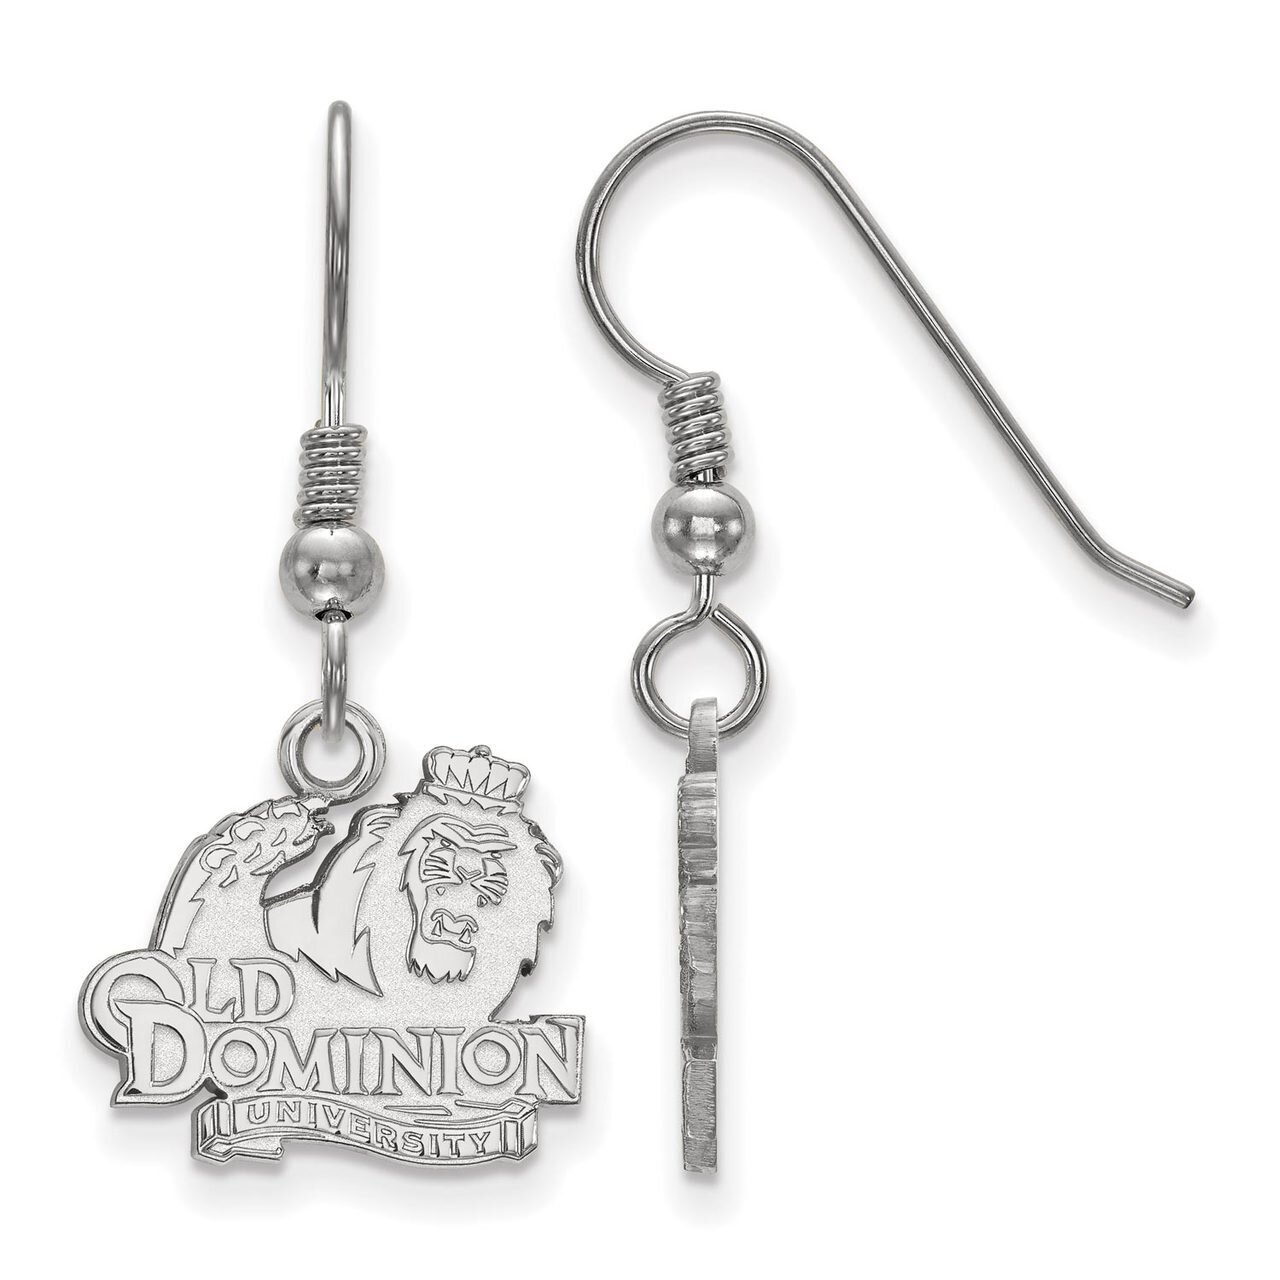 Old Dominion University Small Dangle Earring Wire Sterling Silver SS006ODU